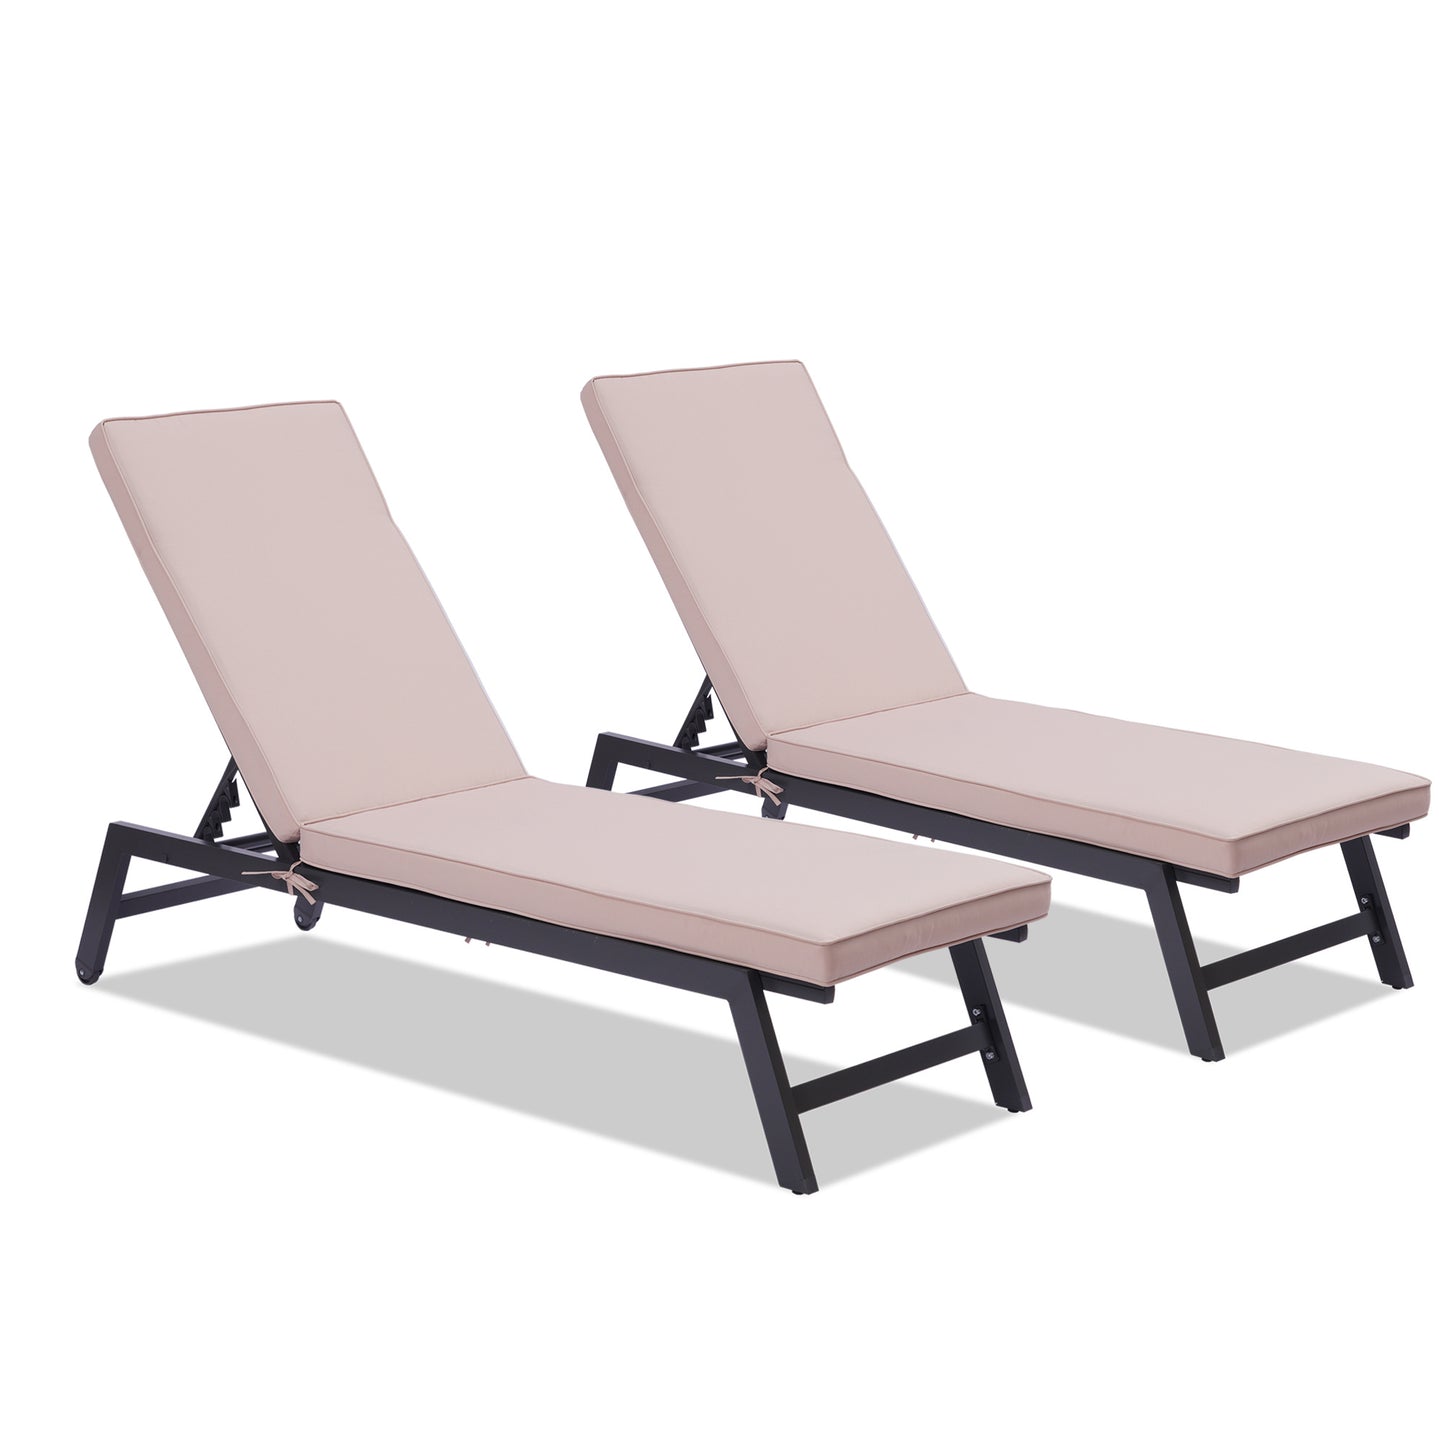 Outdoor Chaise Lounge Chair Set With Cushions.